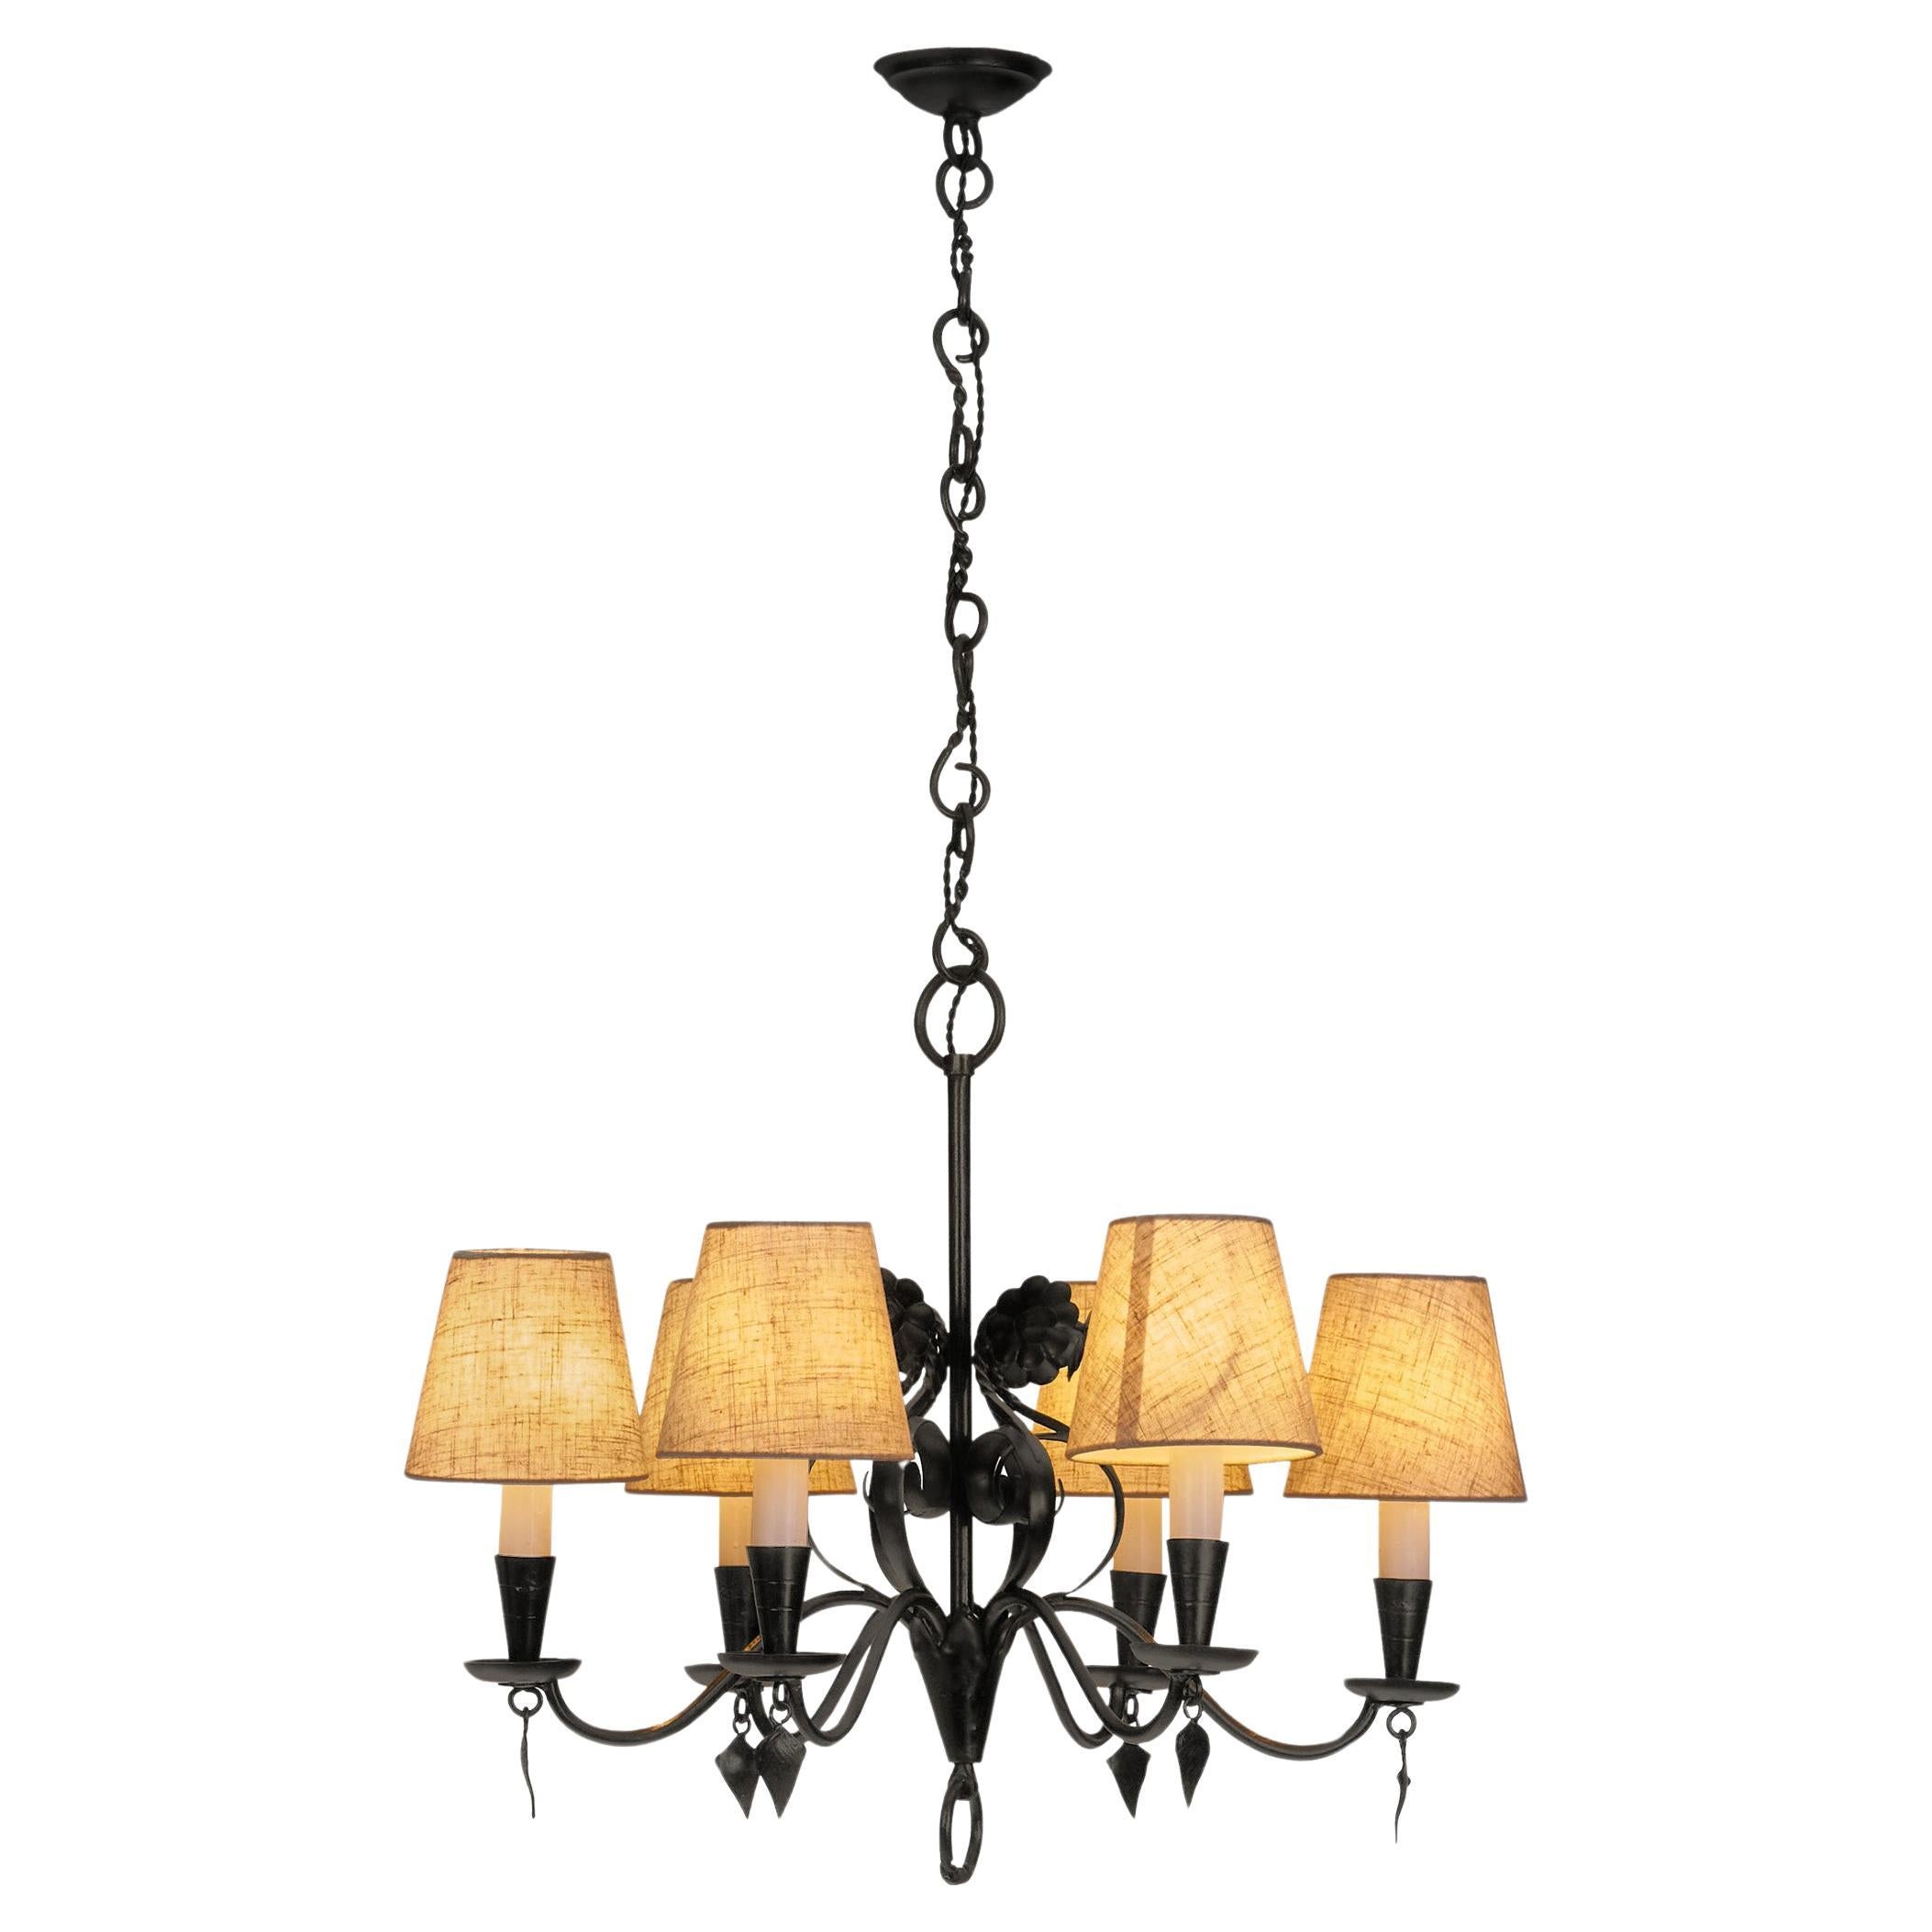 Paavo Tynell “R4/1704” Wrought Iron Chandelier for Taito, Finland 1930s For Sale